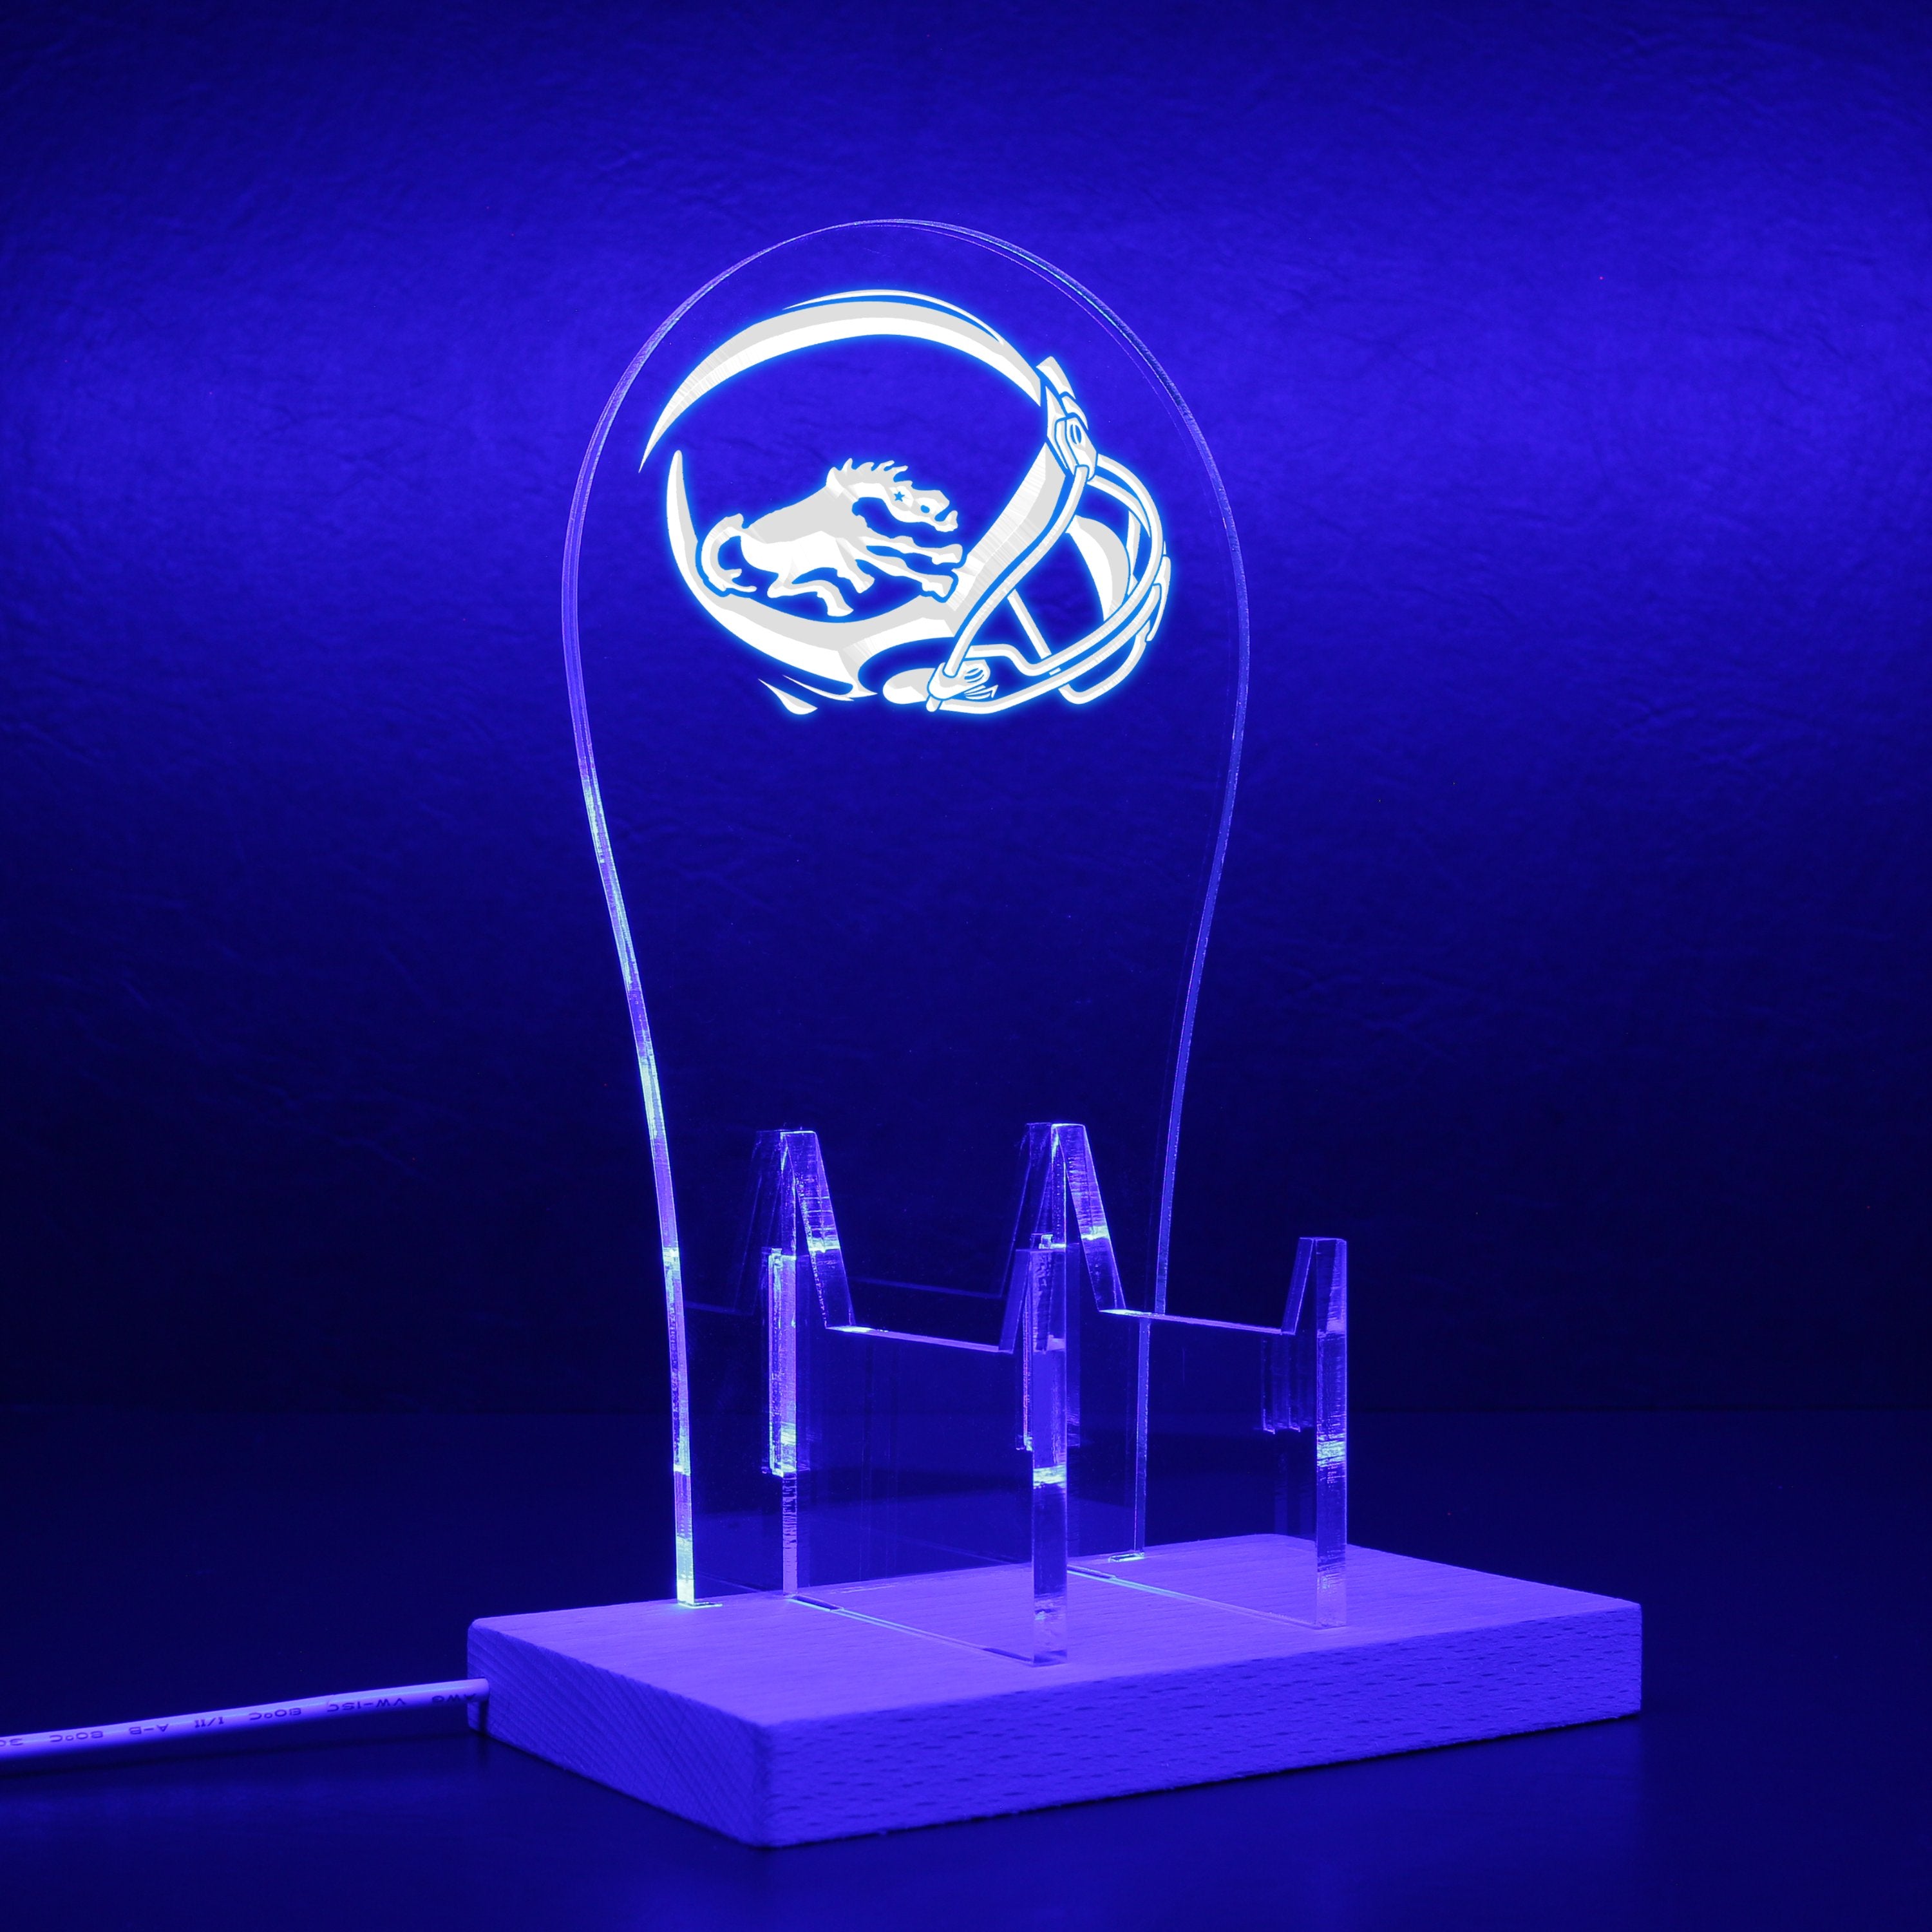 Denver Broncos helmet logo in use from 1962-1965 RGB LED Gaming Headset Controller Stand